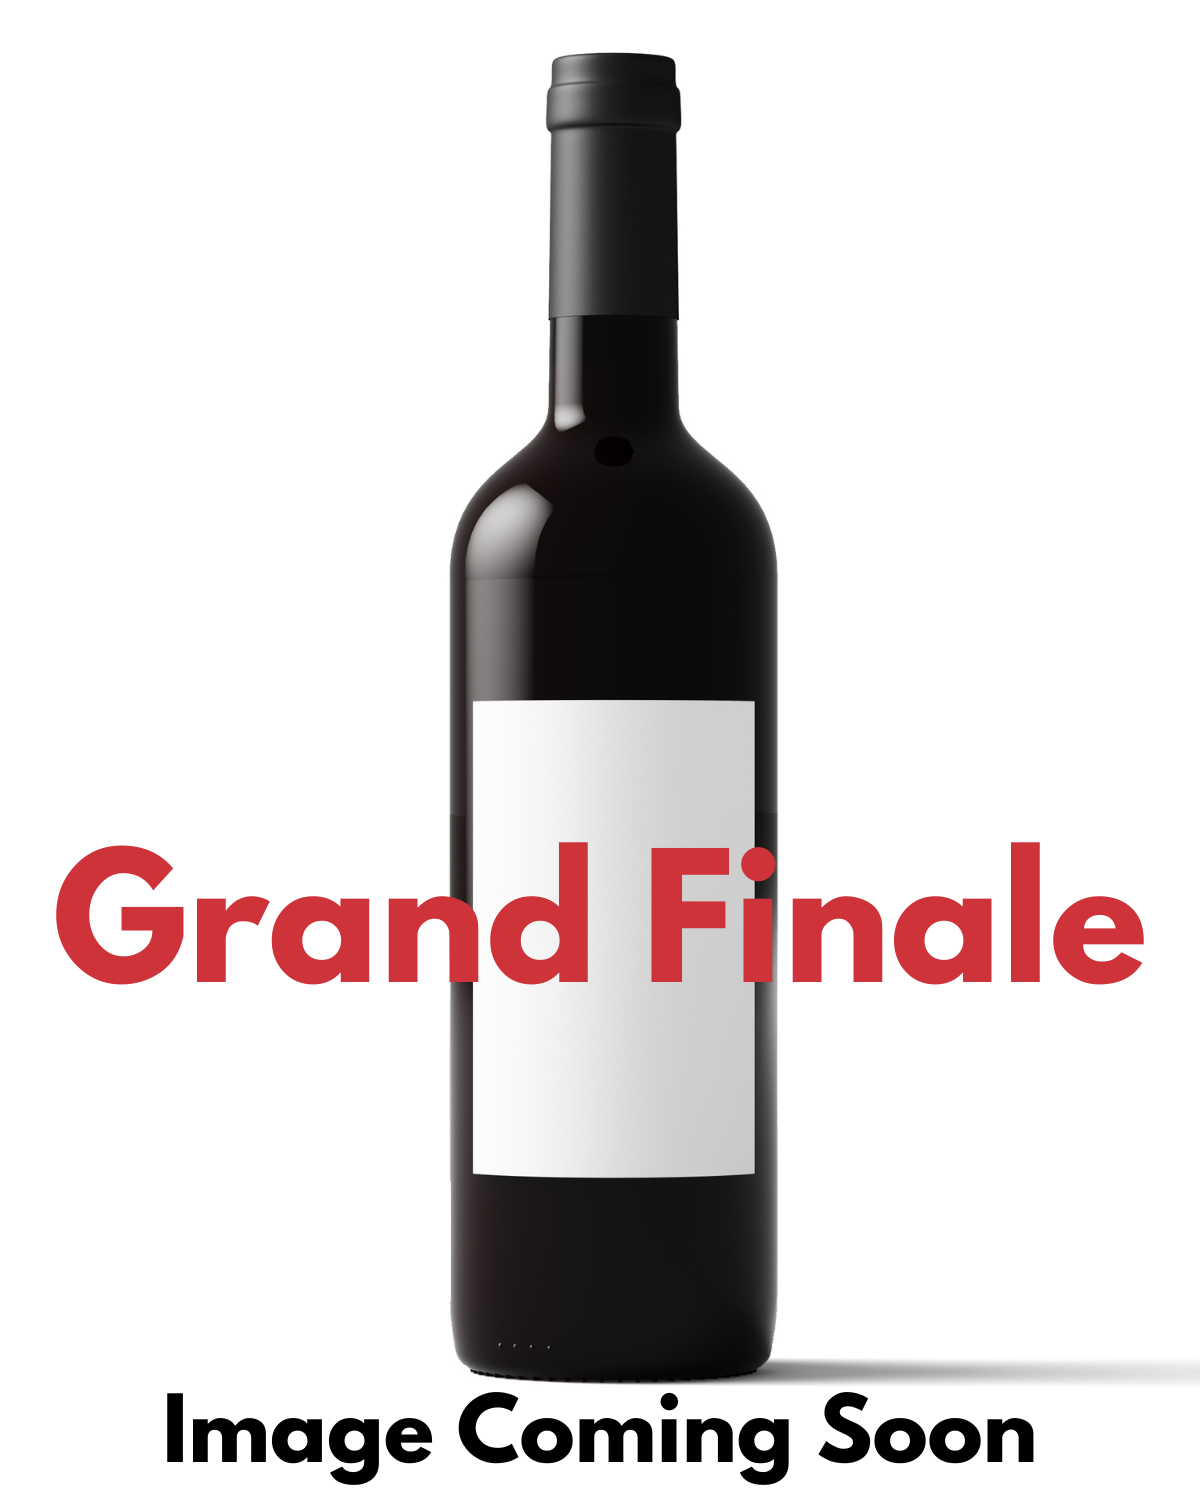 Product Image for Grand Finale